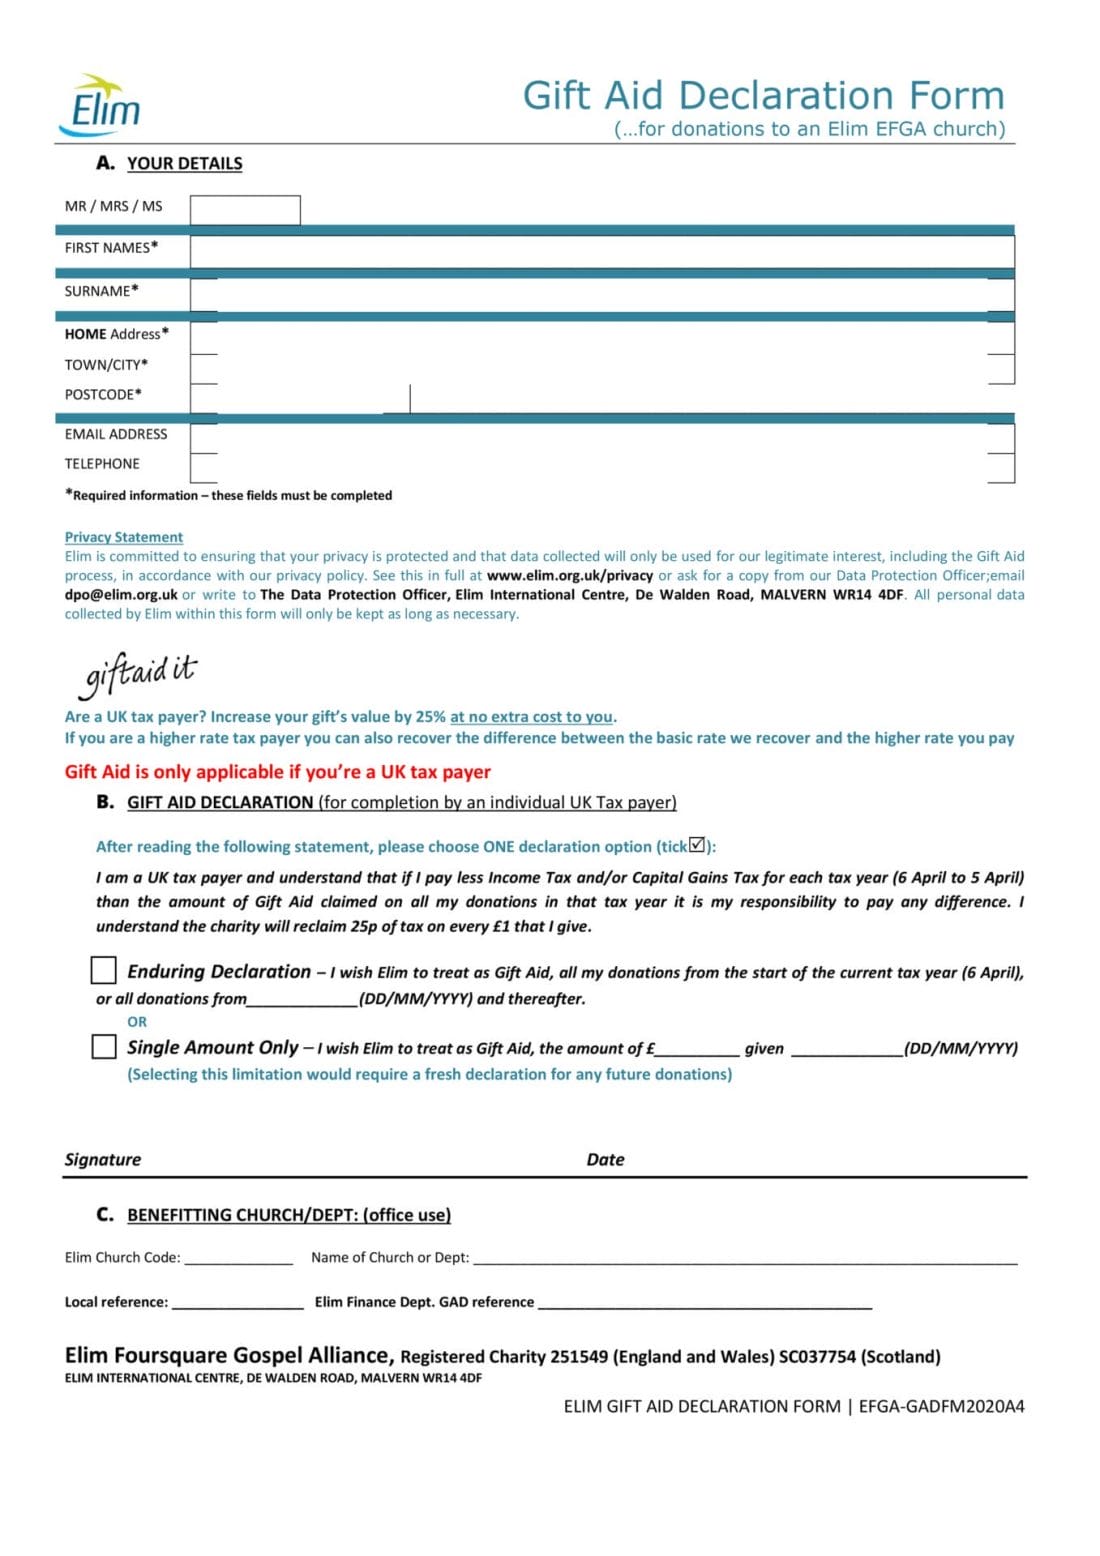 Gift Aid form